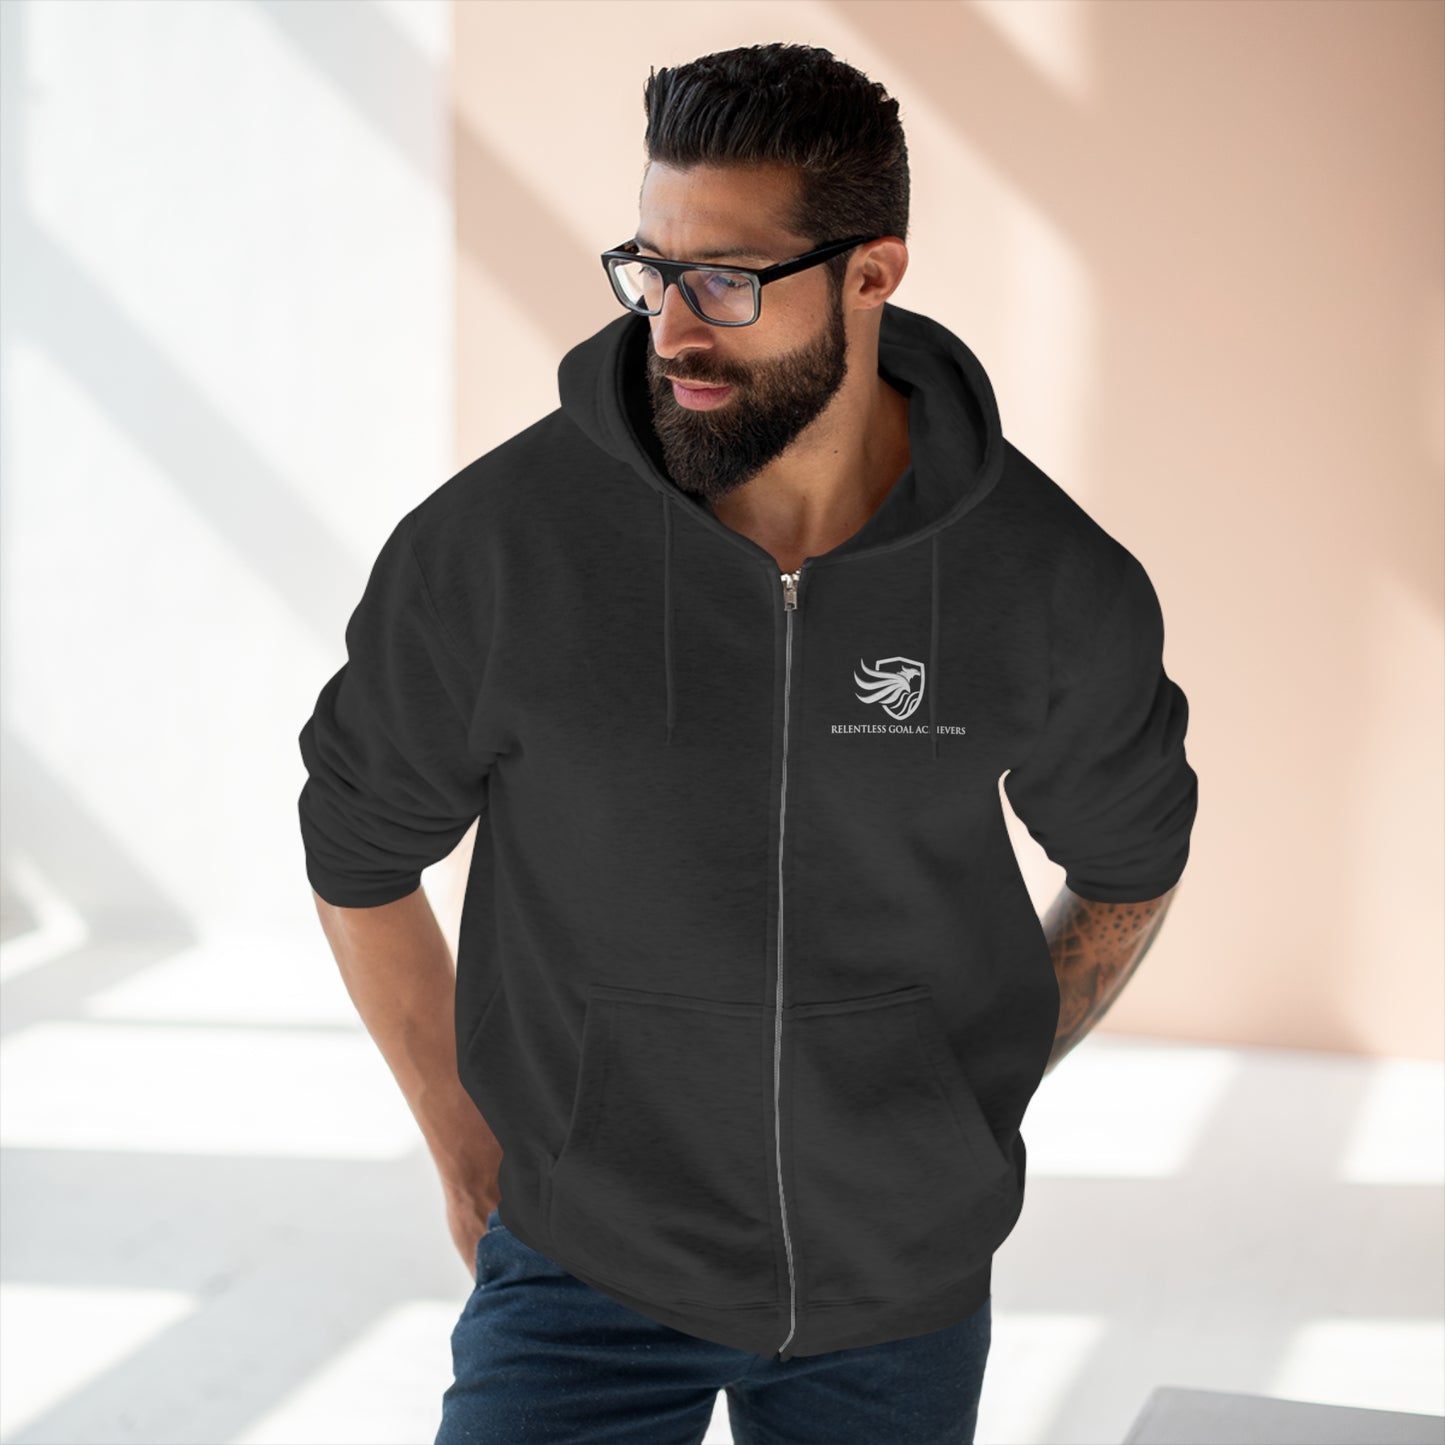 Everything You Want Is Possible For You - Full Zip Hoodie